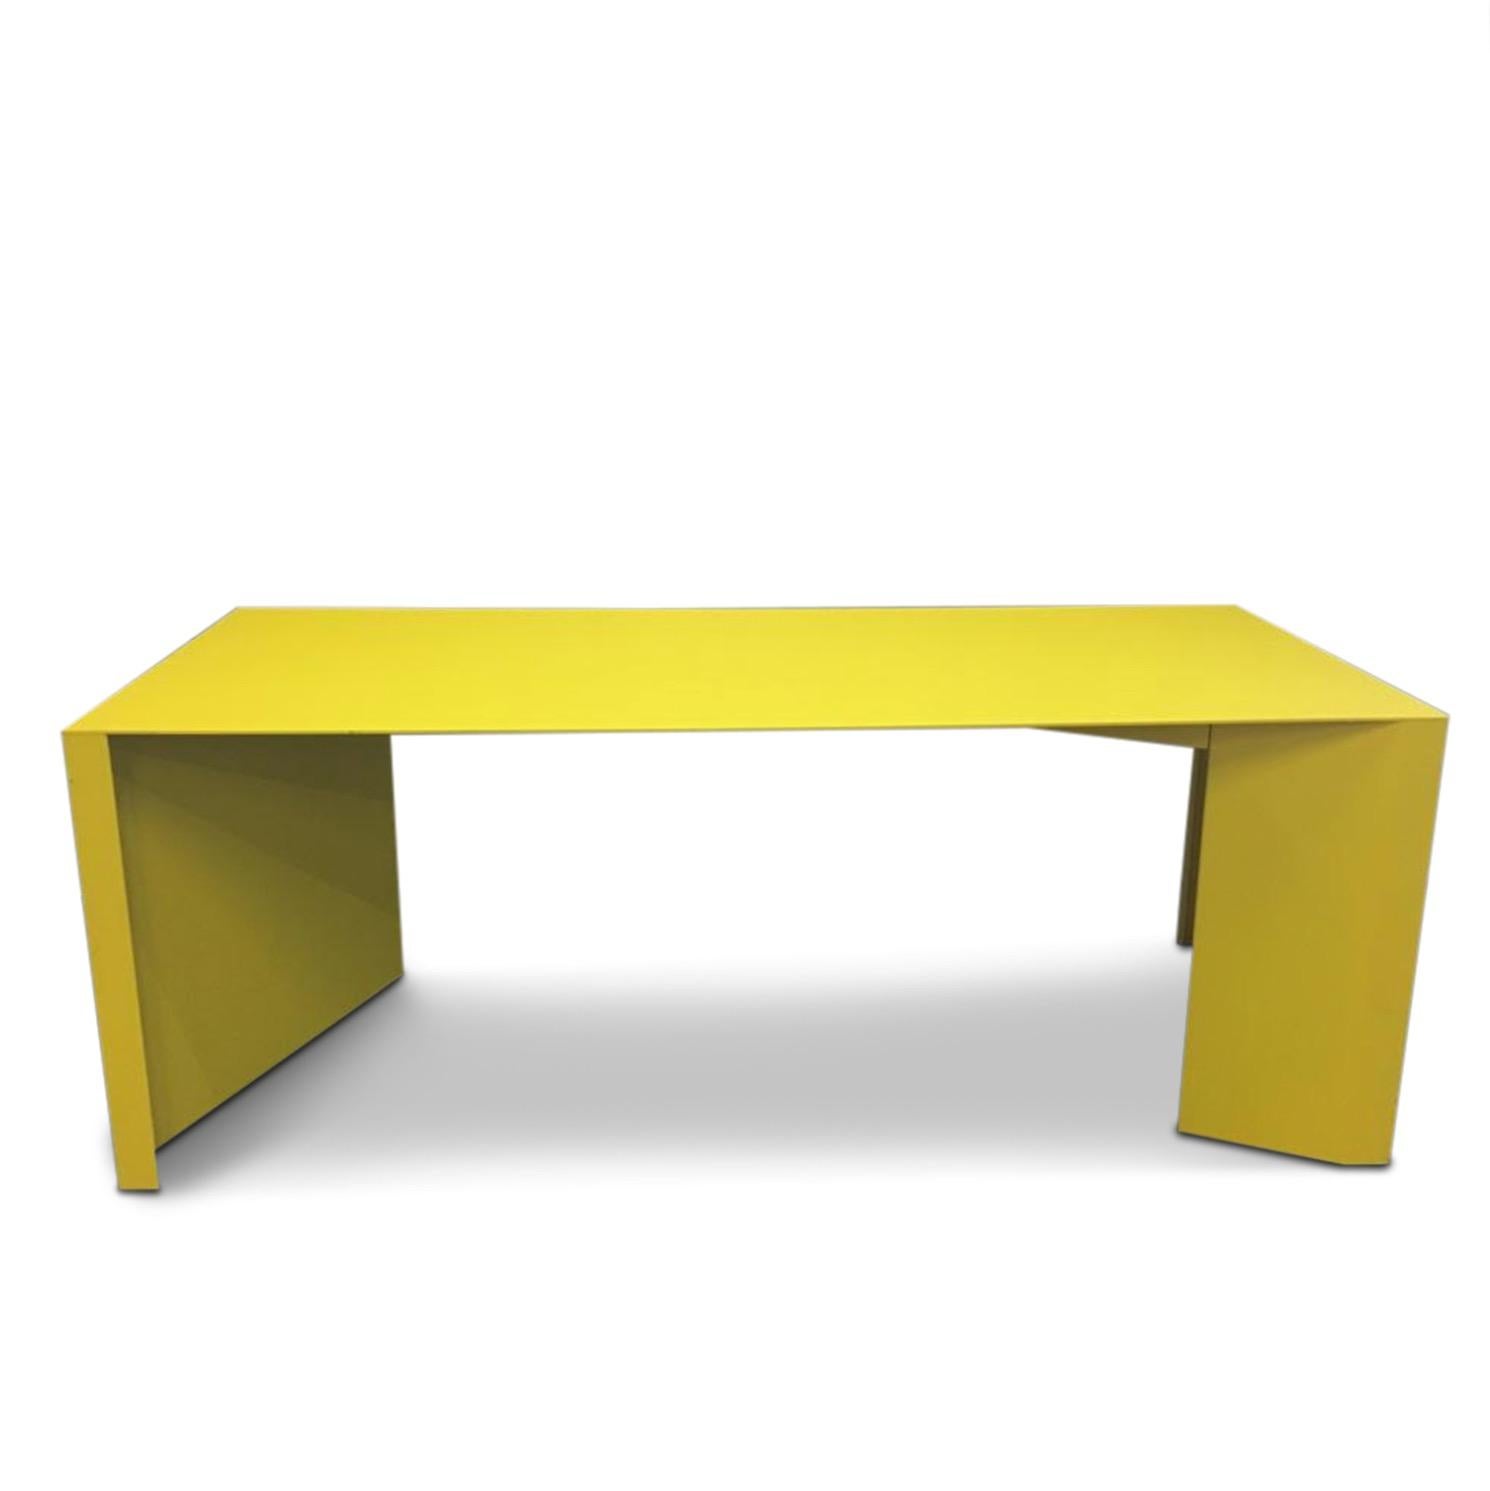 Eccentric Metal Yellow Z-Table by Claire Bataille and Paul Ibens for Bulo 1